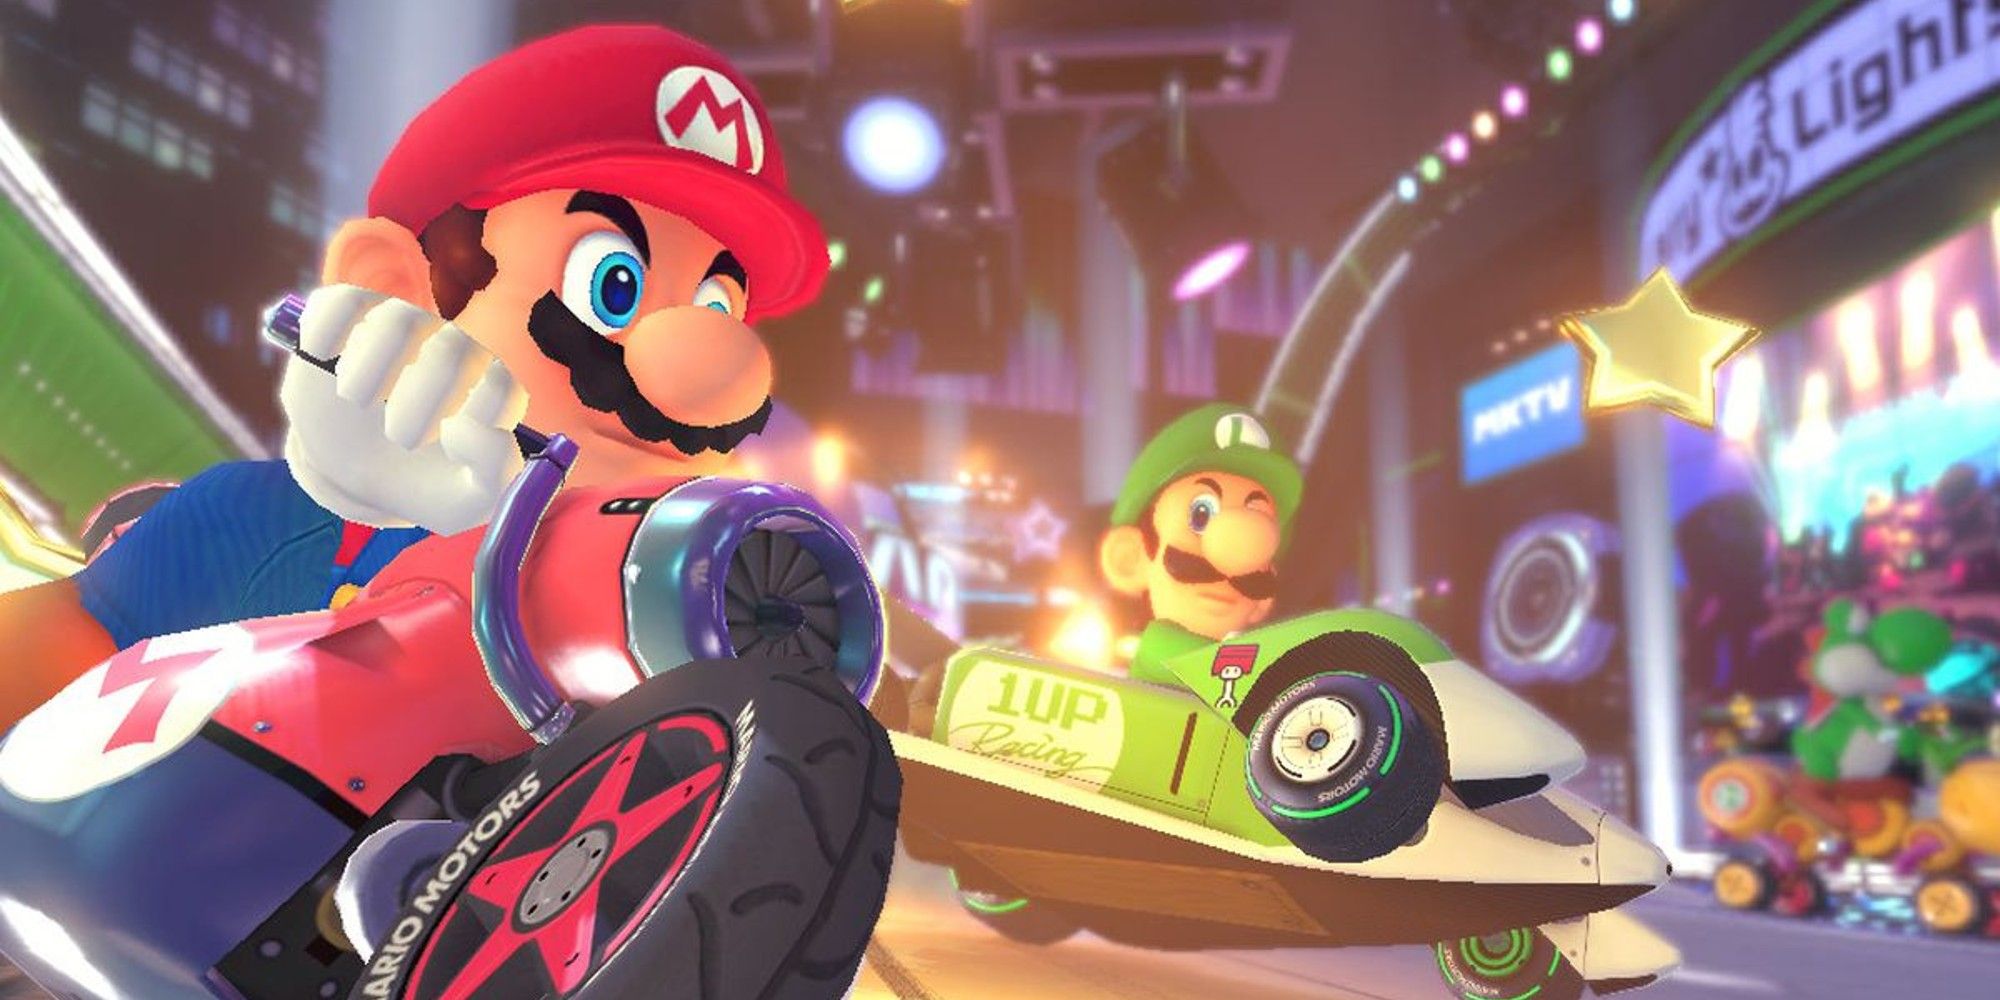 Mario Kart 8 Deluxe's final DLC brings a long-awaited track